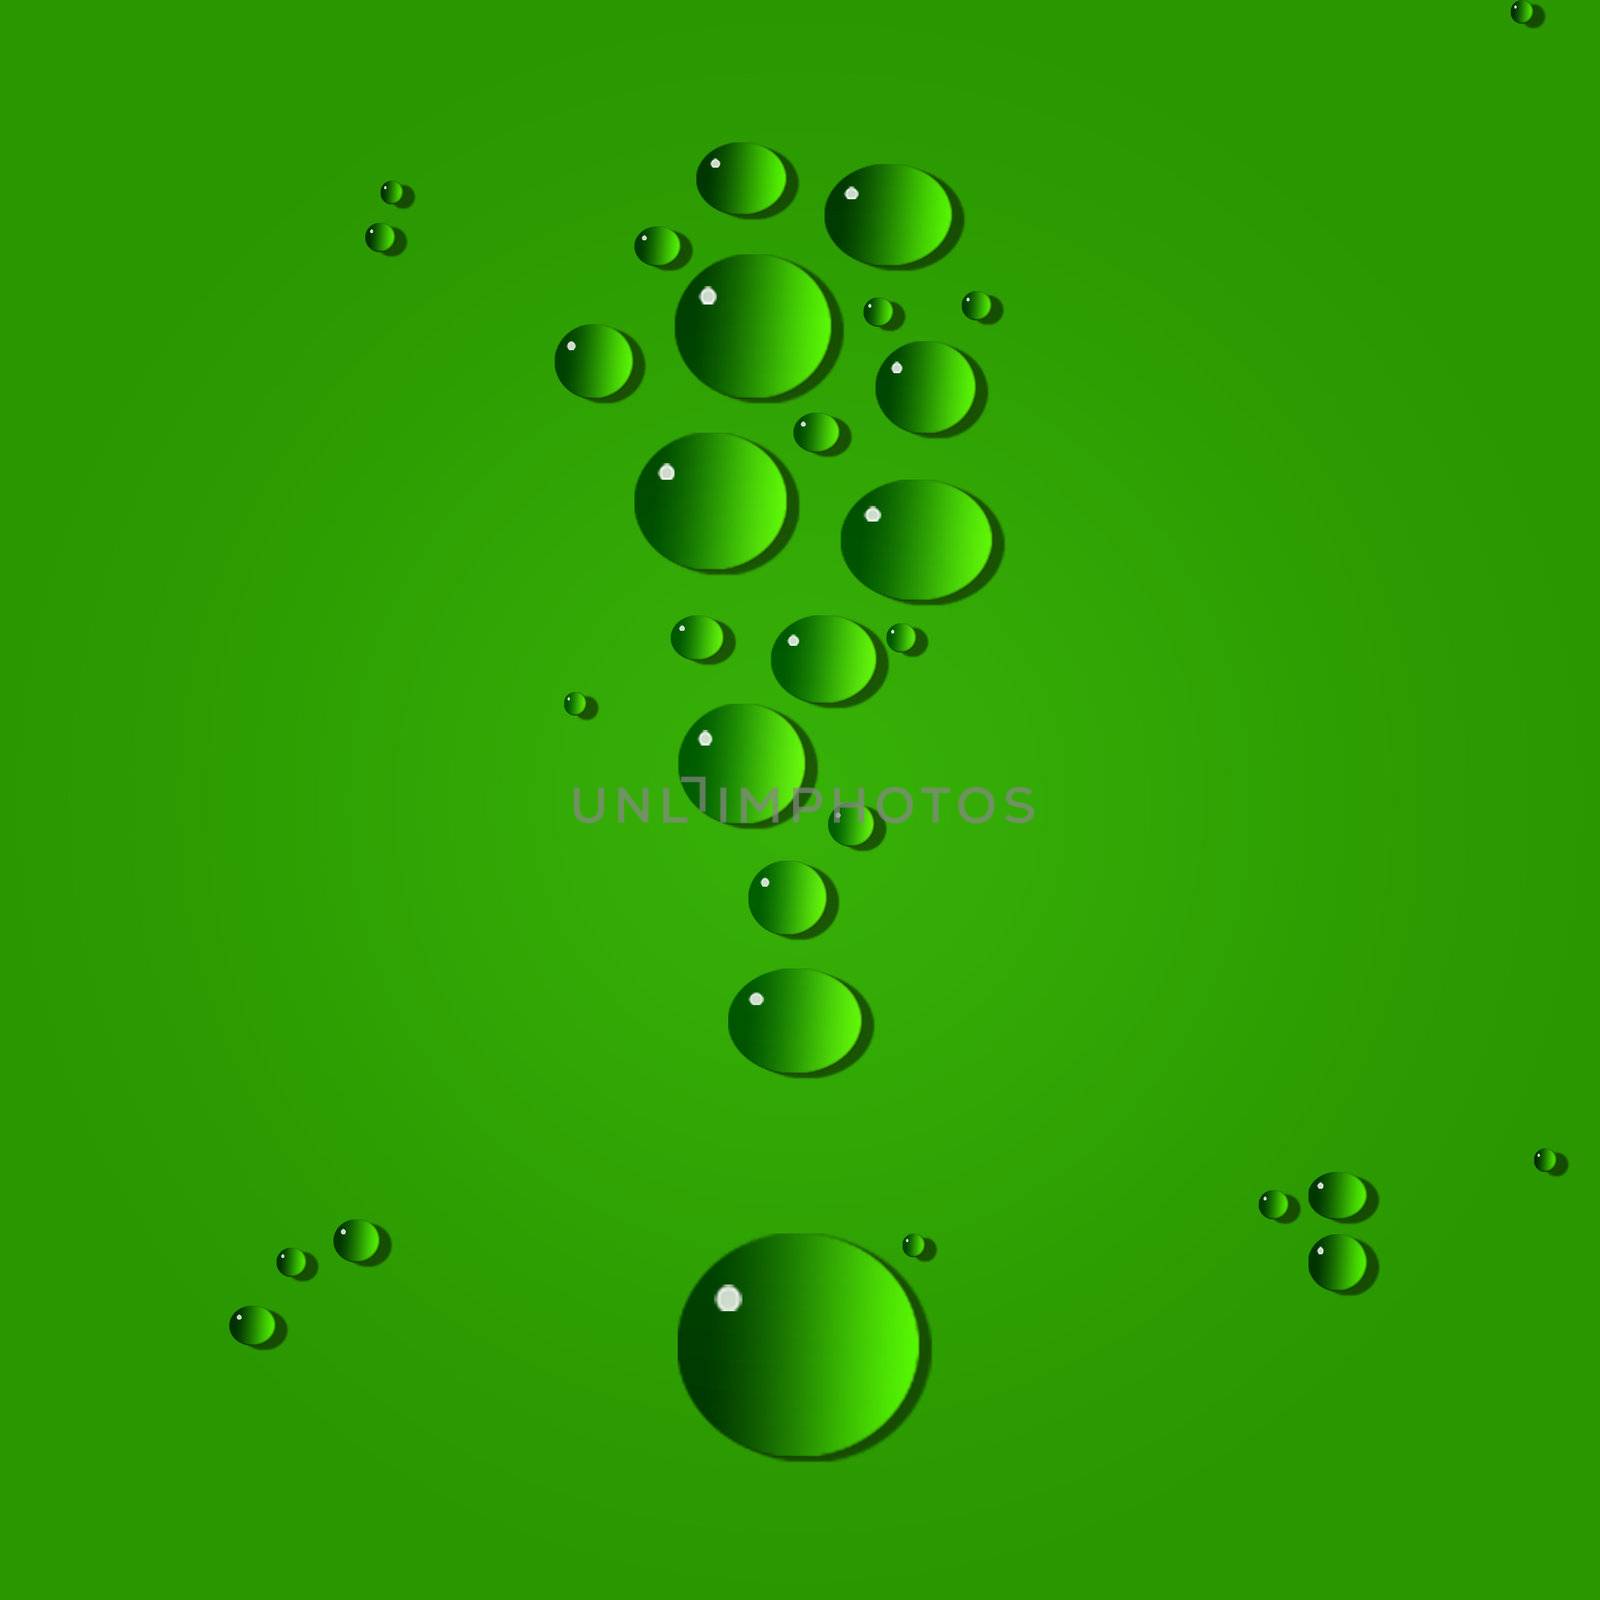 Water drops on a green background by petrkurgan